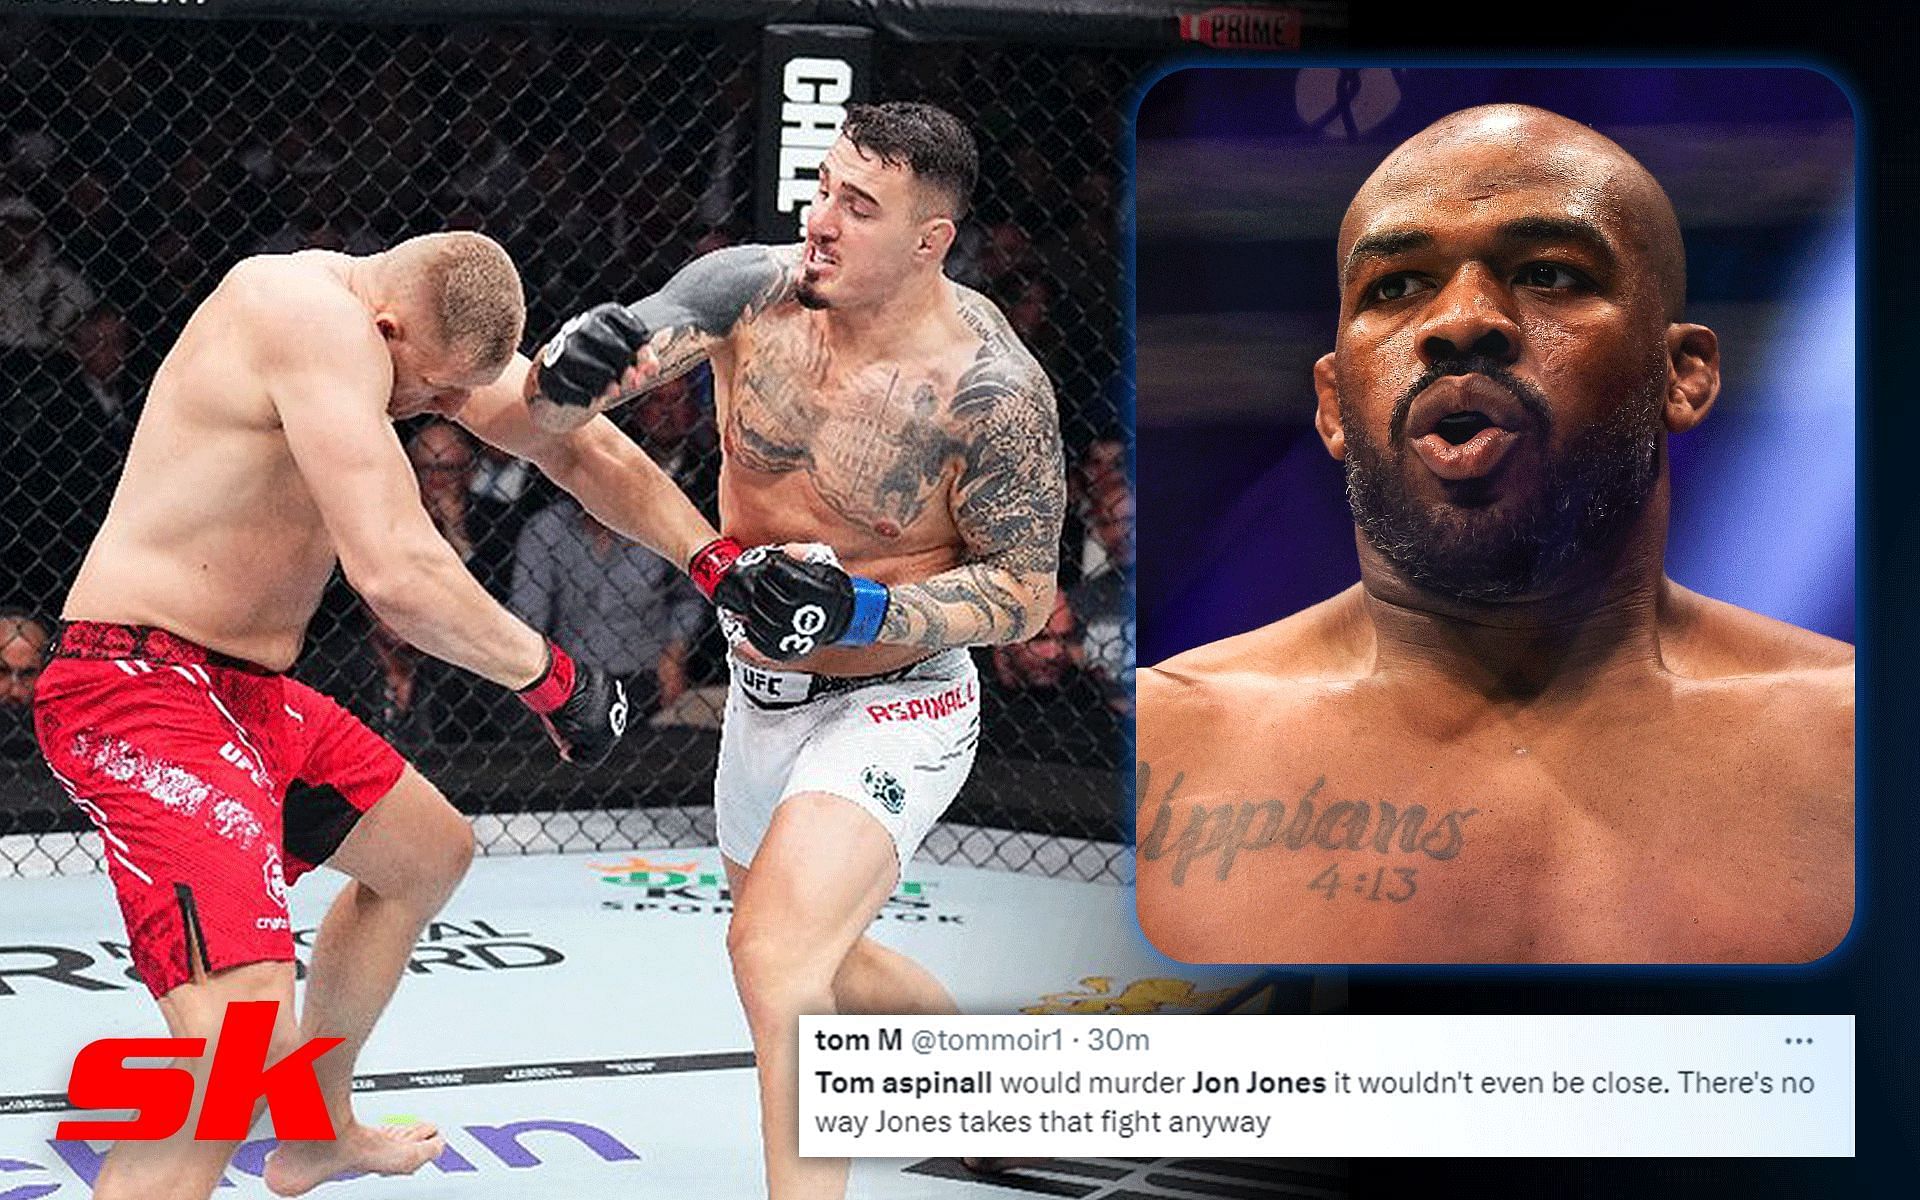 Tom Aspinall during his UFC 295 fight (left) and Jon Jones (right) (Images via @UFCNews and Getty)